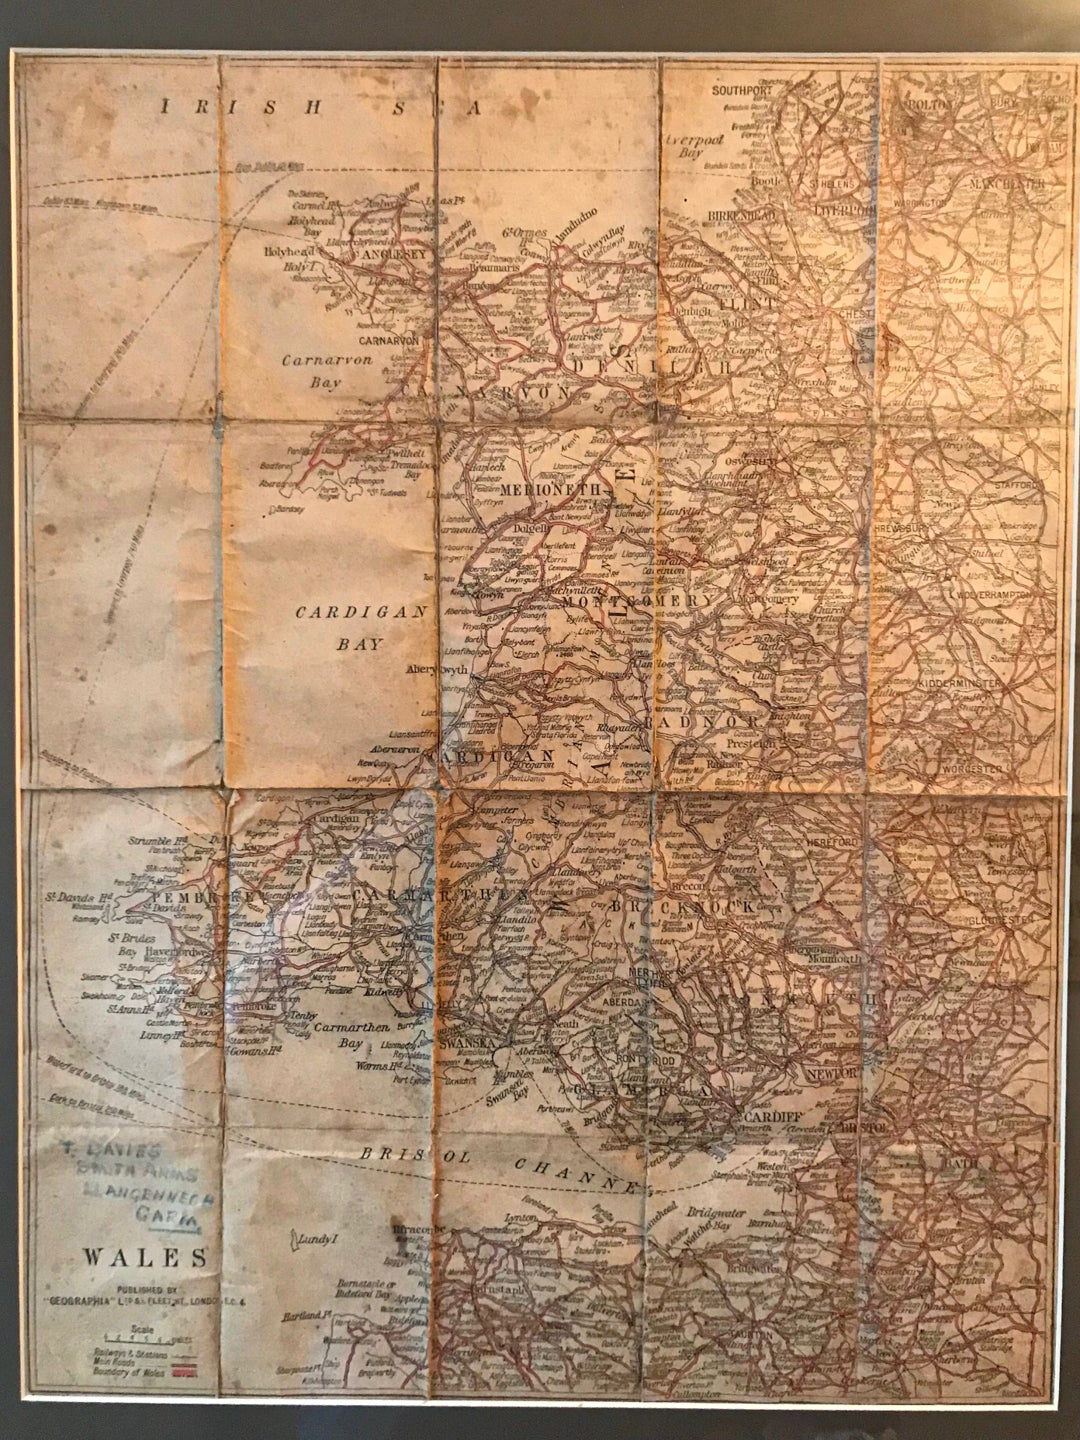 1920's Geographia Ltd map of Wales, sympathetically framed